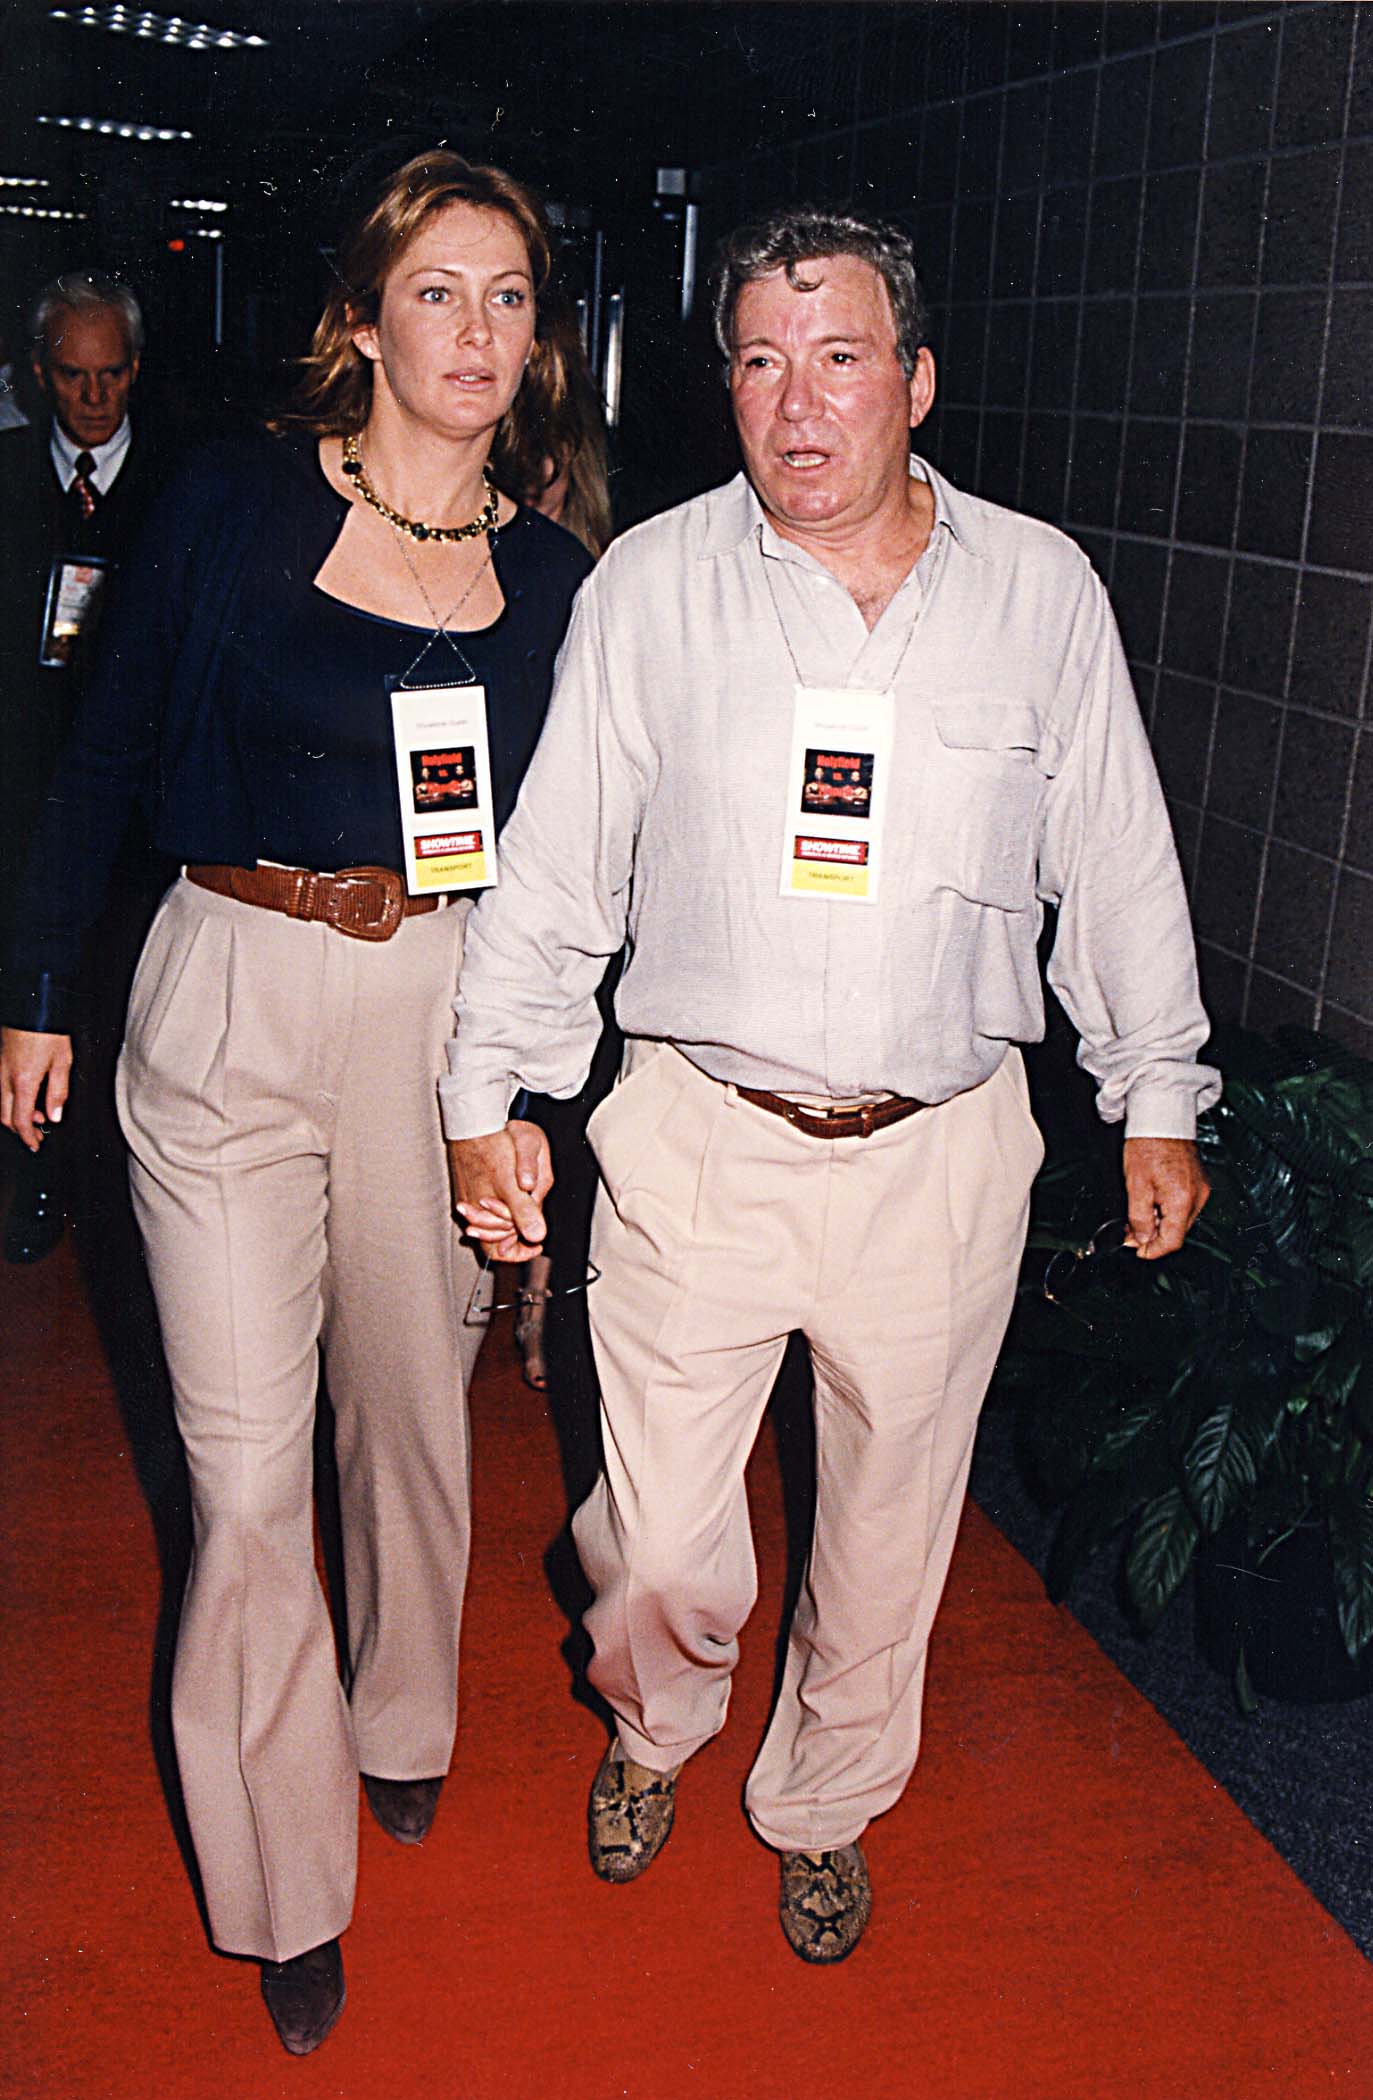 Nerine Kidd and William Shatner at the Holyfield v. Tyson II fight, on September 6, 1997. | Source: Getty Images